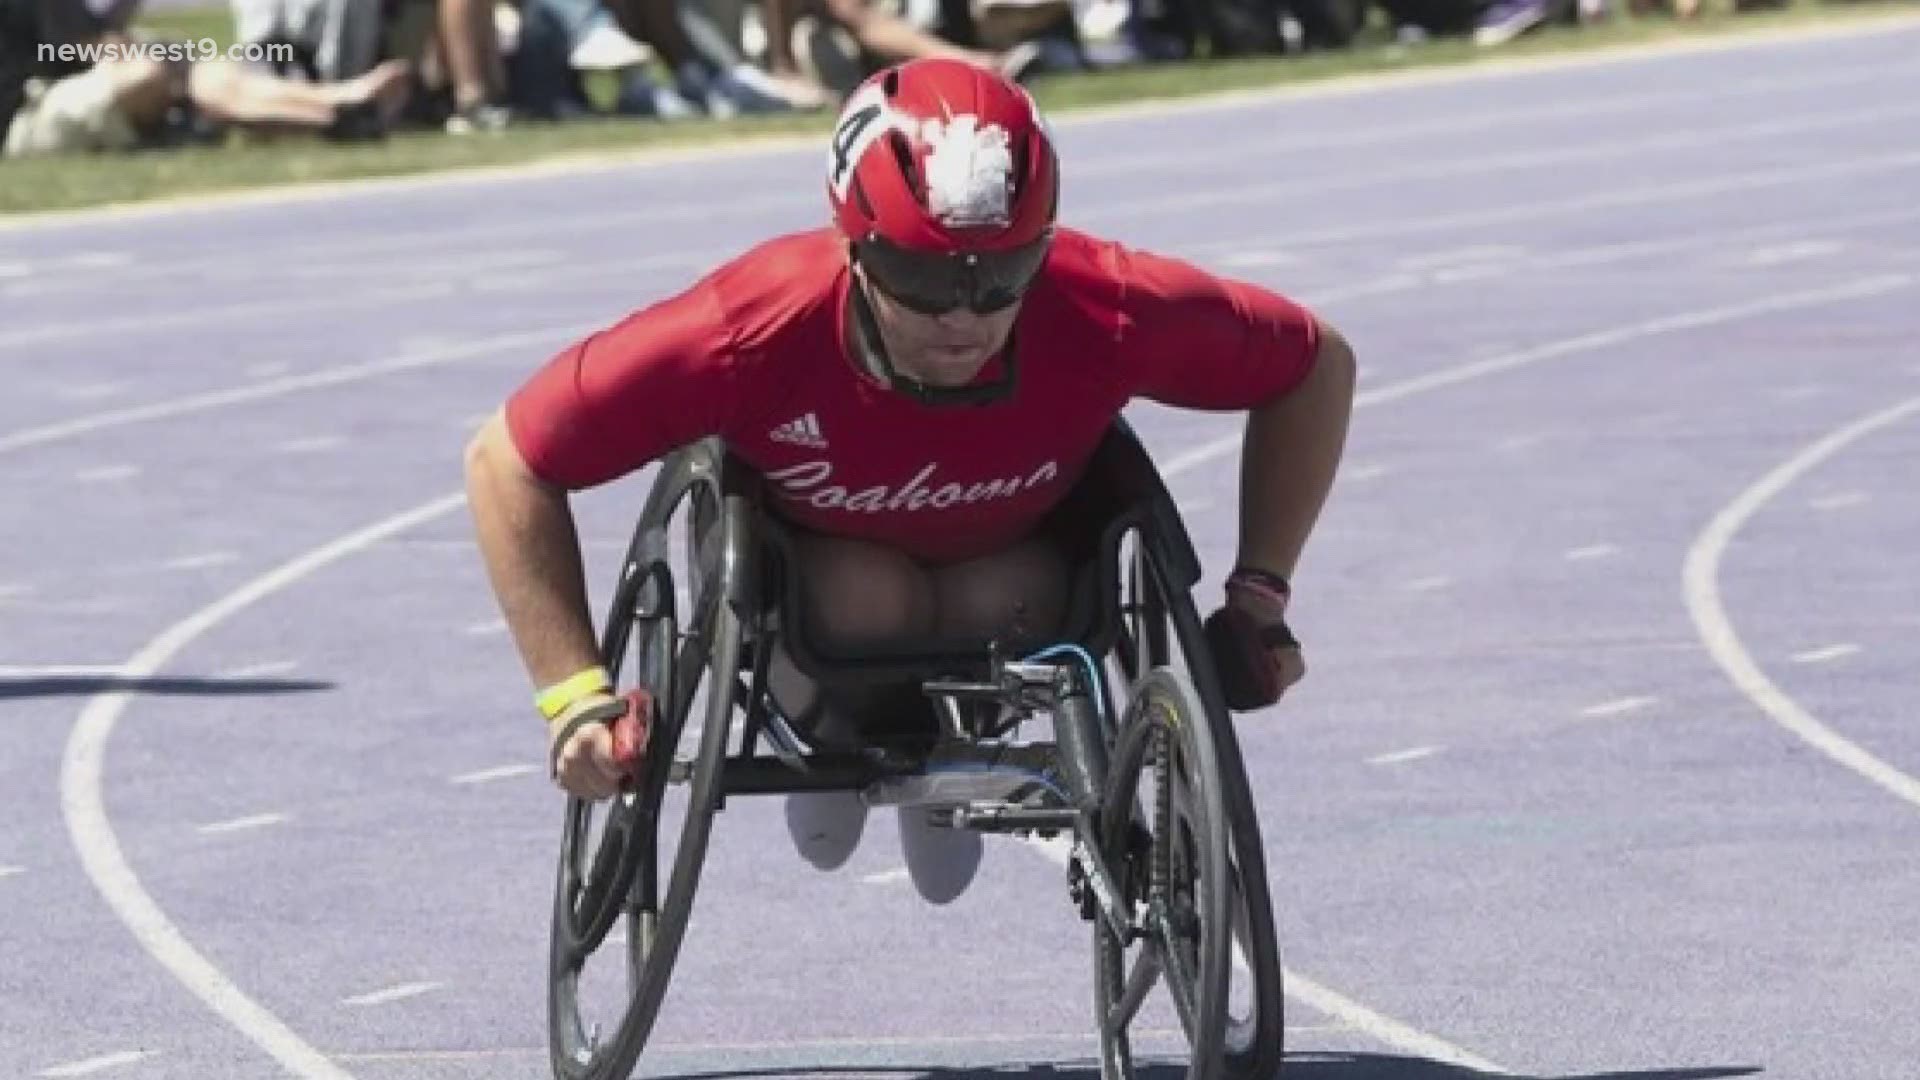 Bulldog Vance Ott is paving a new path and proving that his story goes far beyond being a wheelchair athlete.